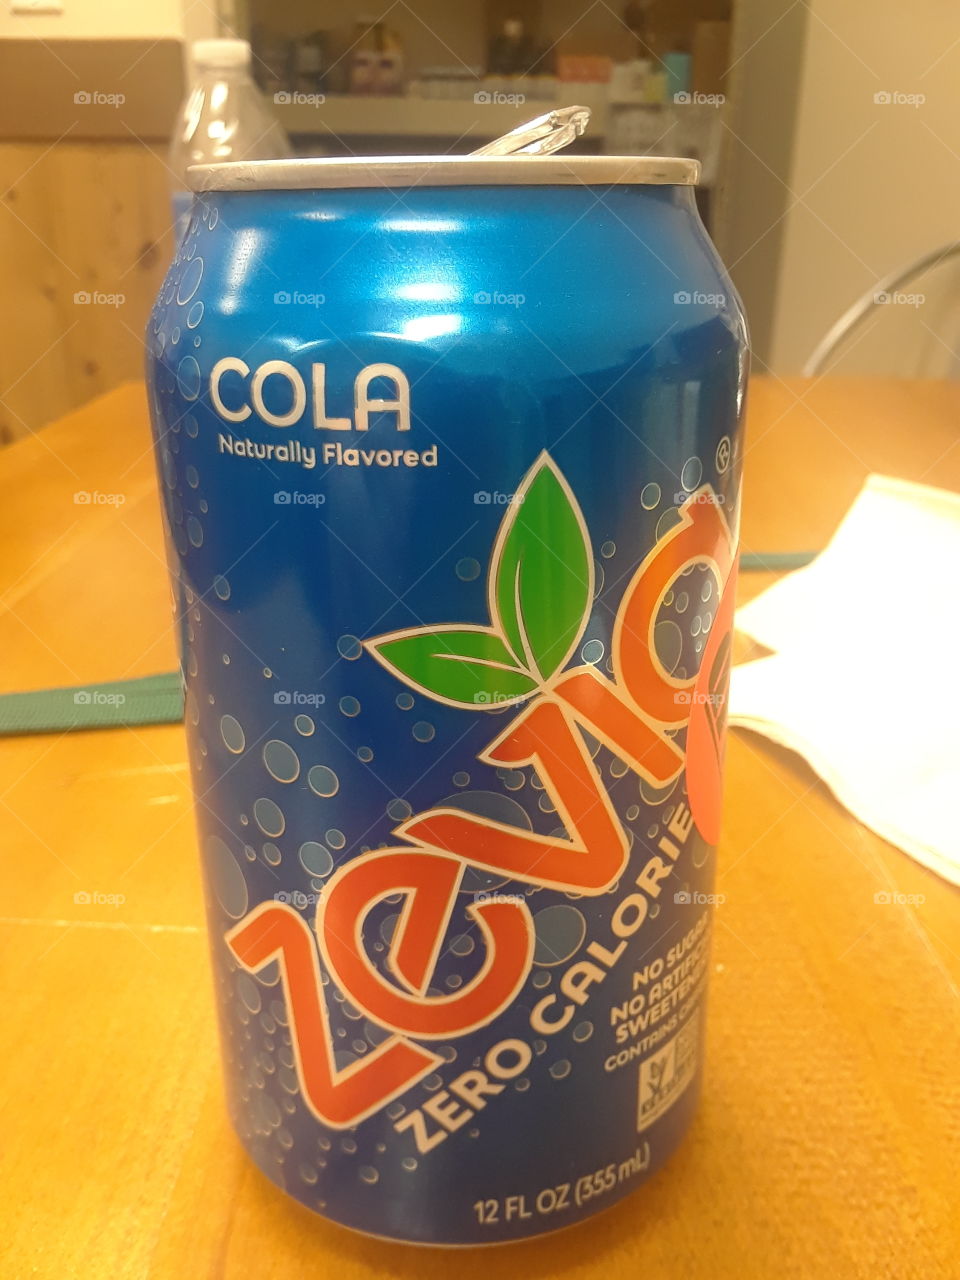 drink zevia cola from sprouts.no calories and very tasty buddy.You will like this incredible flavor and awesome drink.Come to sprouts market and check out our ice cold fridge to see what we have in stock.Terrific cold drinks serviced daily.